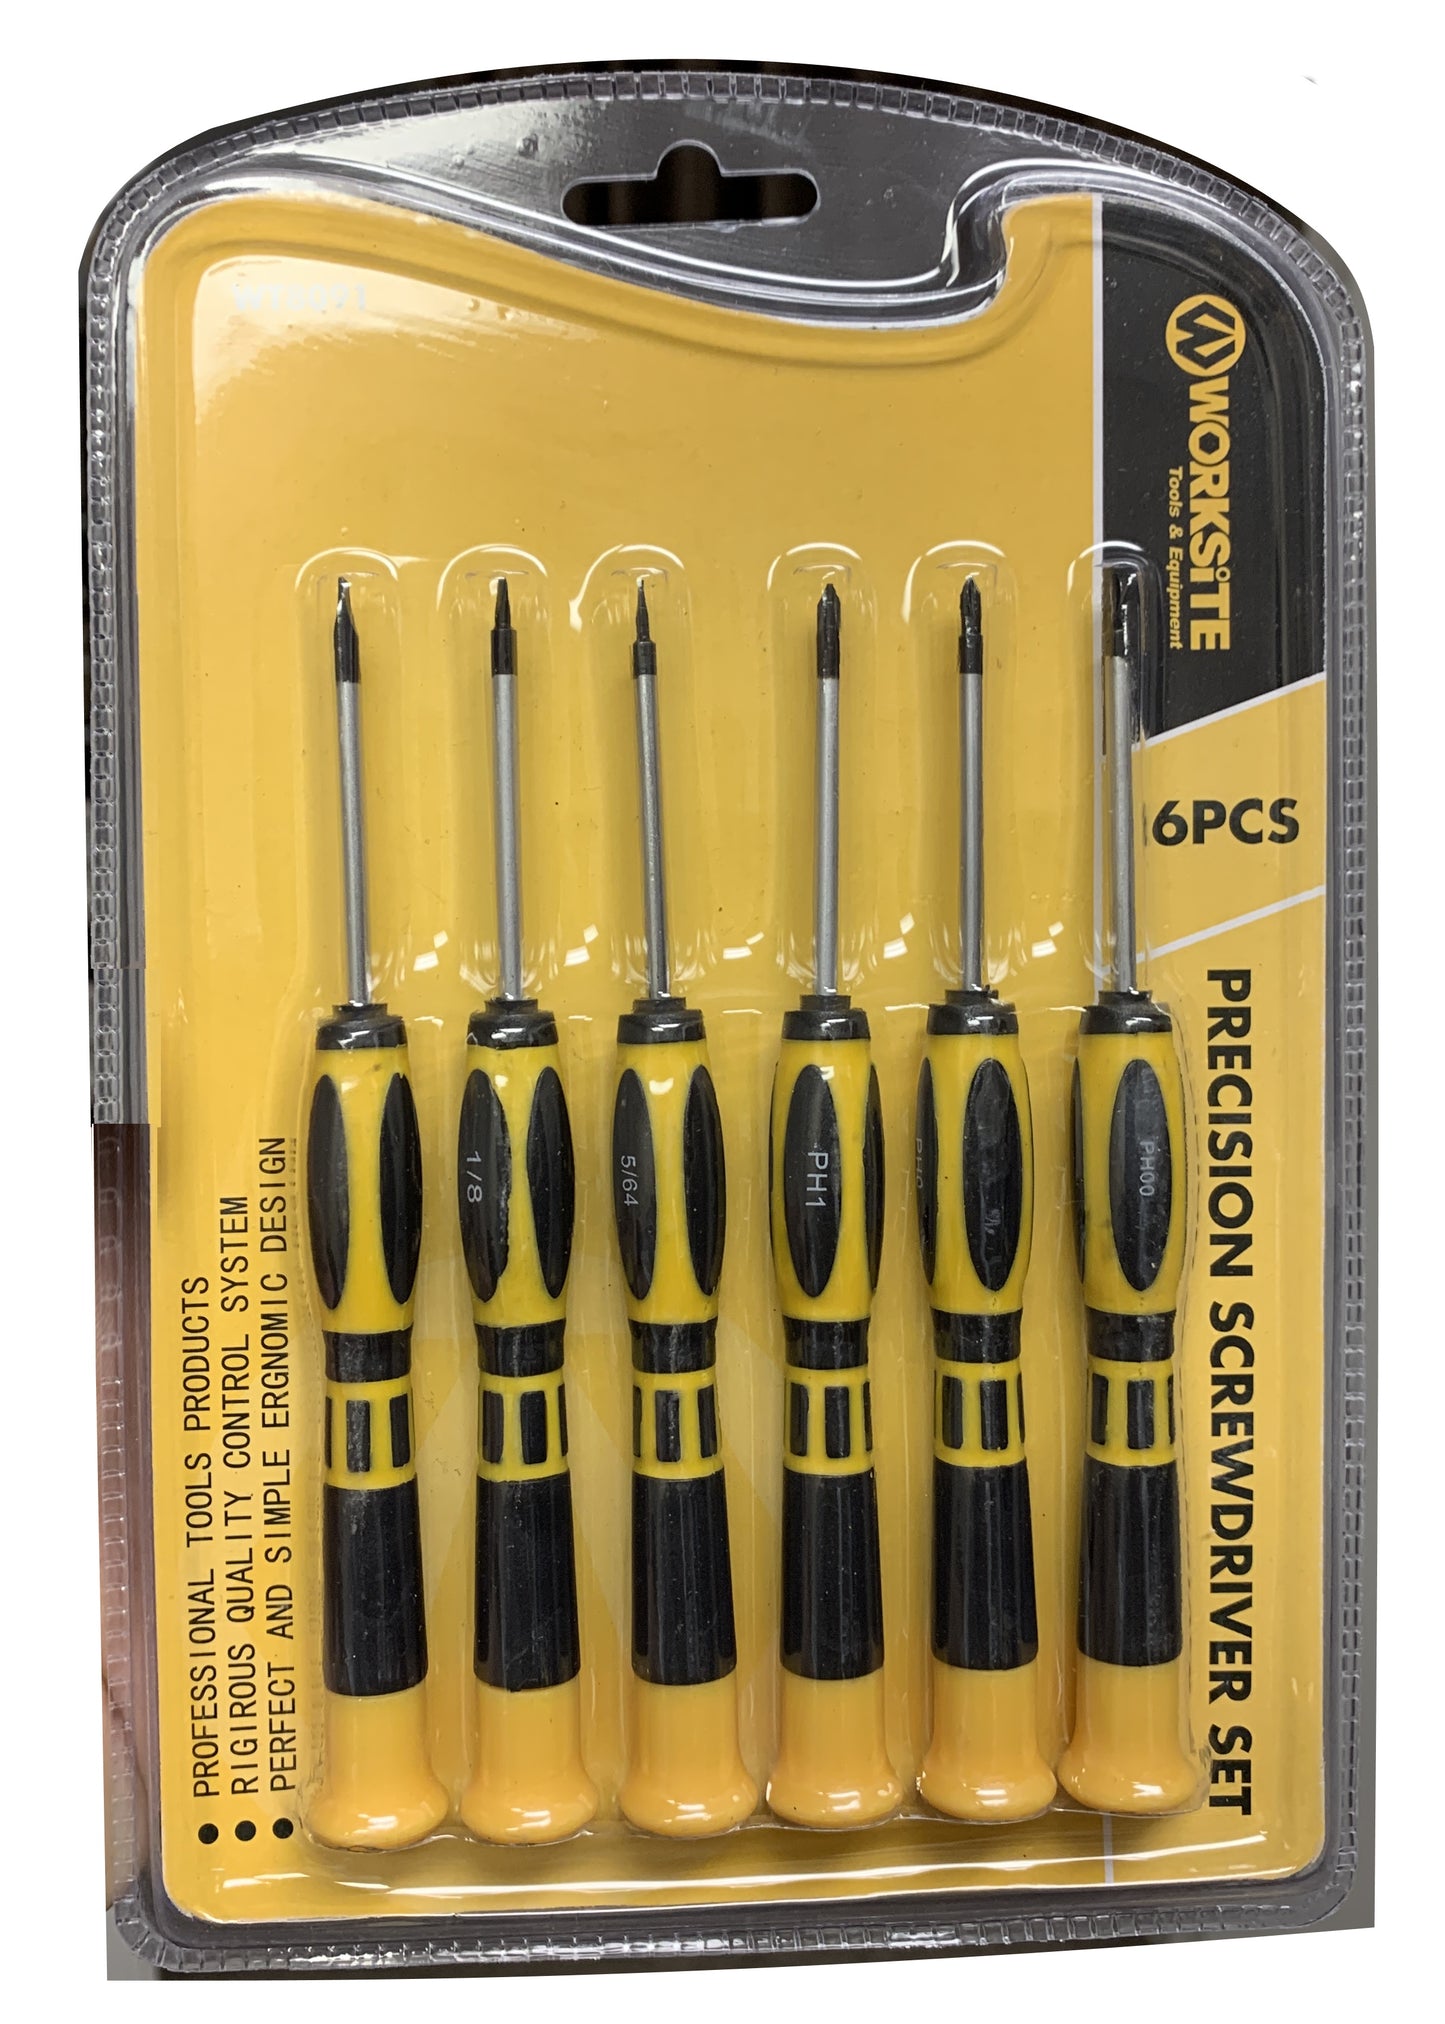 6 pieces Precision Screwdriver Set Professional Worksite WT8091 Slotted PH Tool